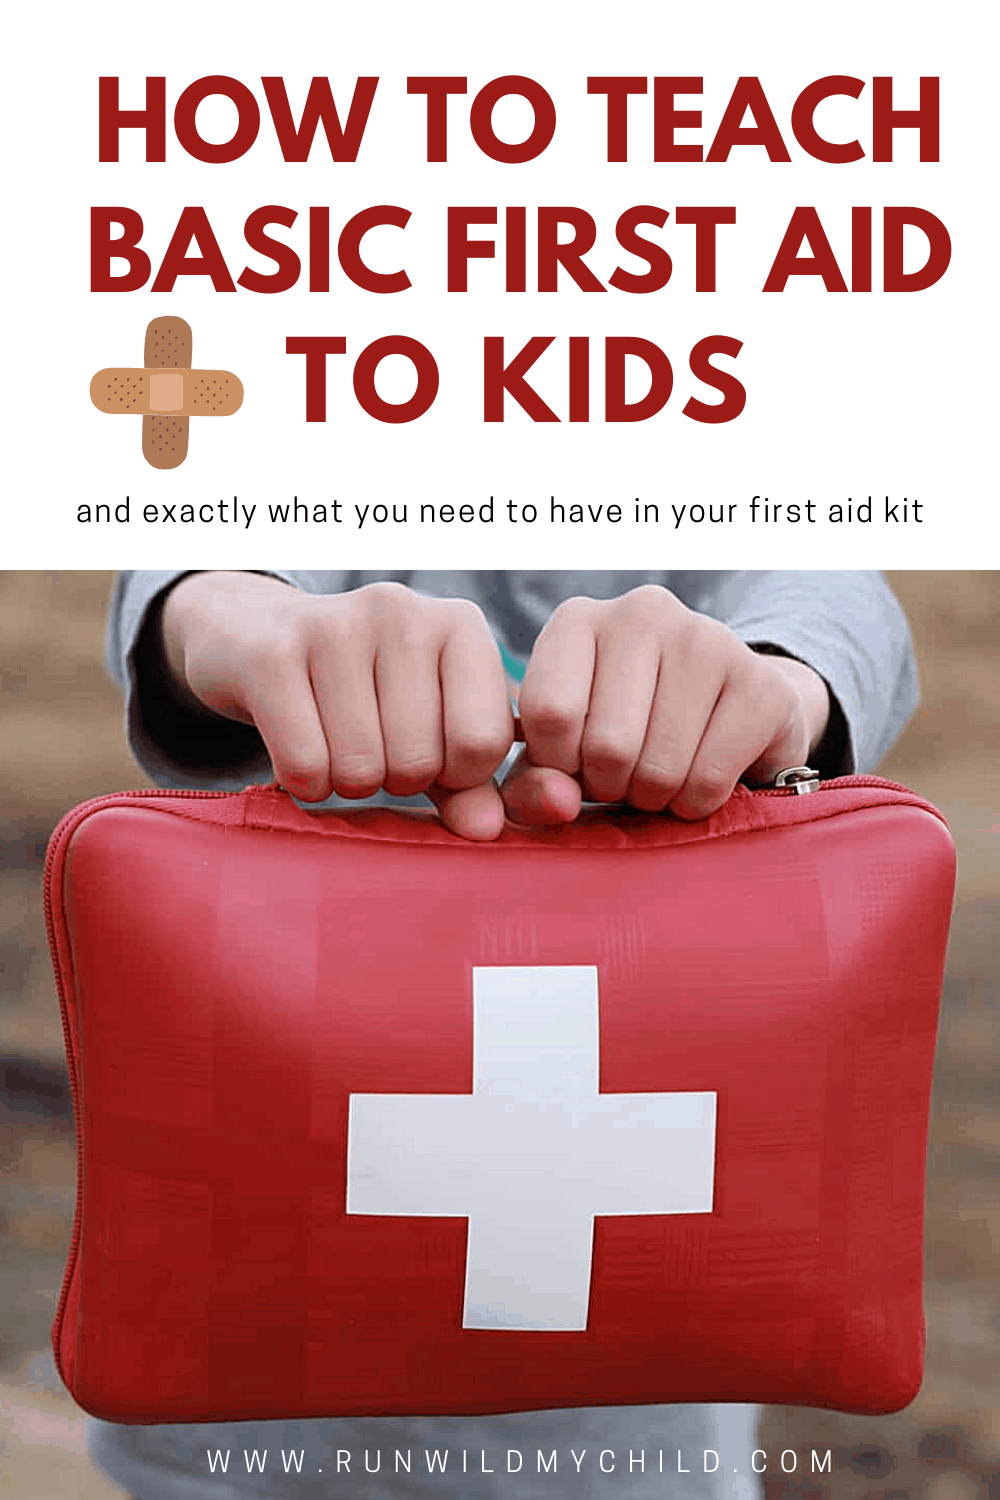 How to Teach Basic First Aid to Kids - Tips and advice from a nurse and mom